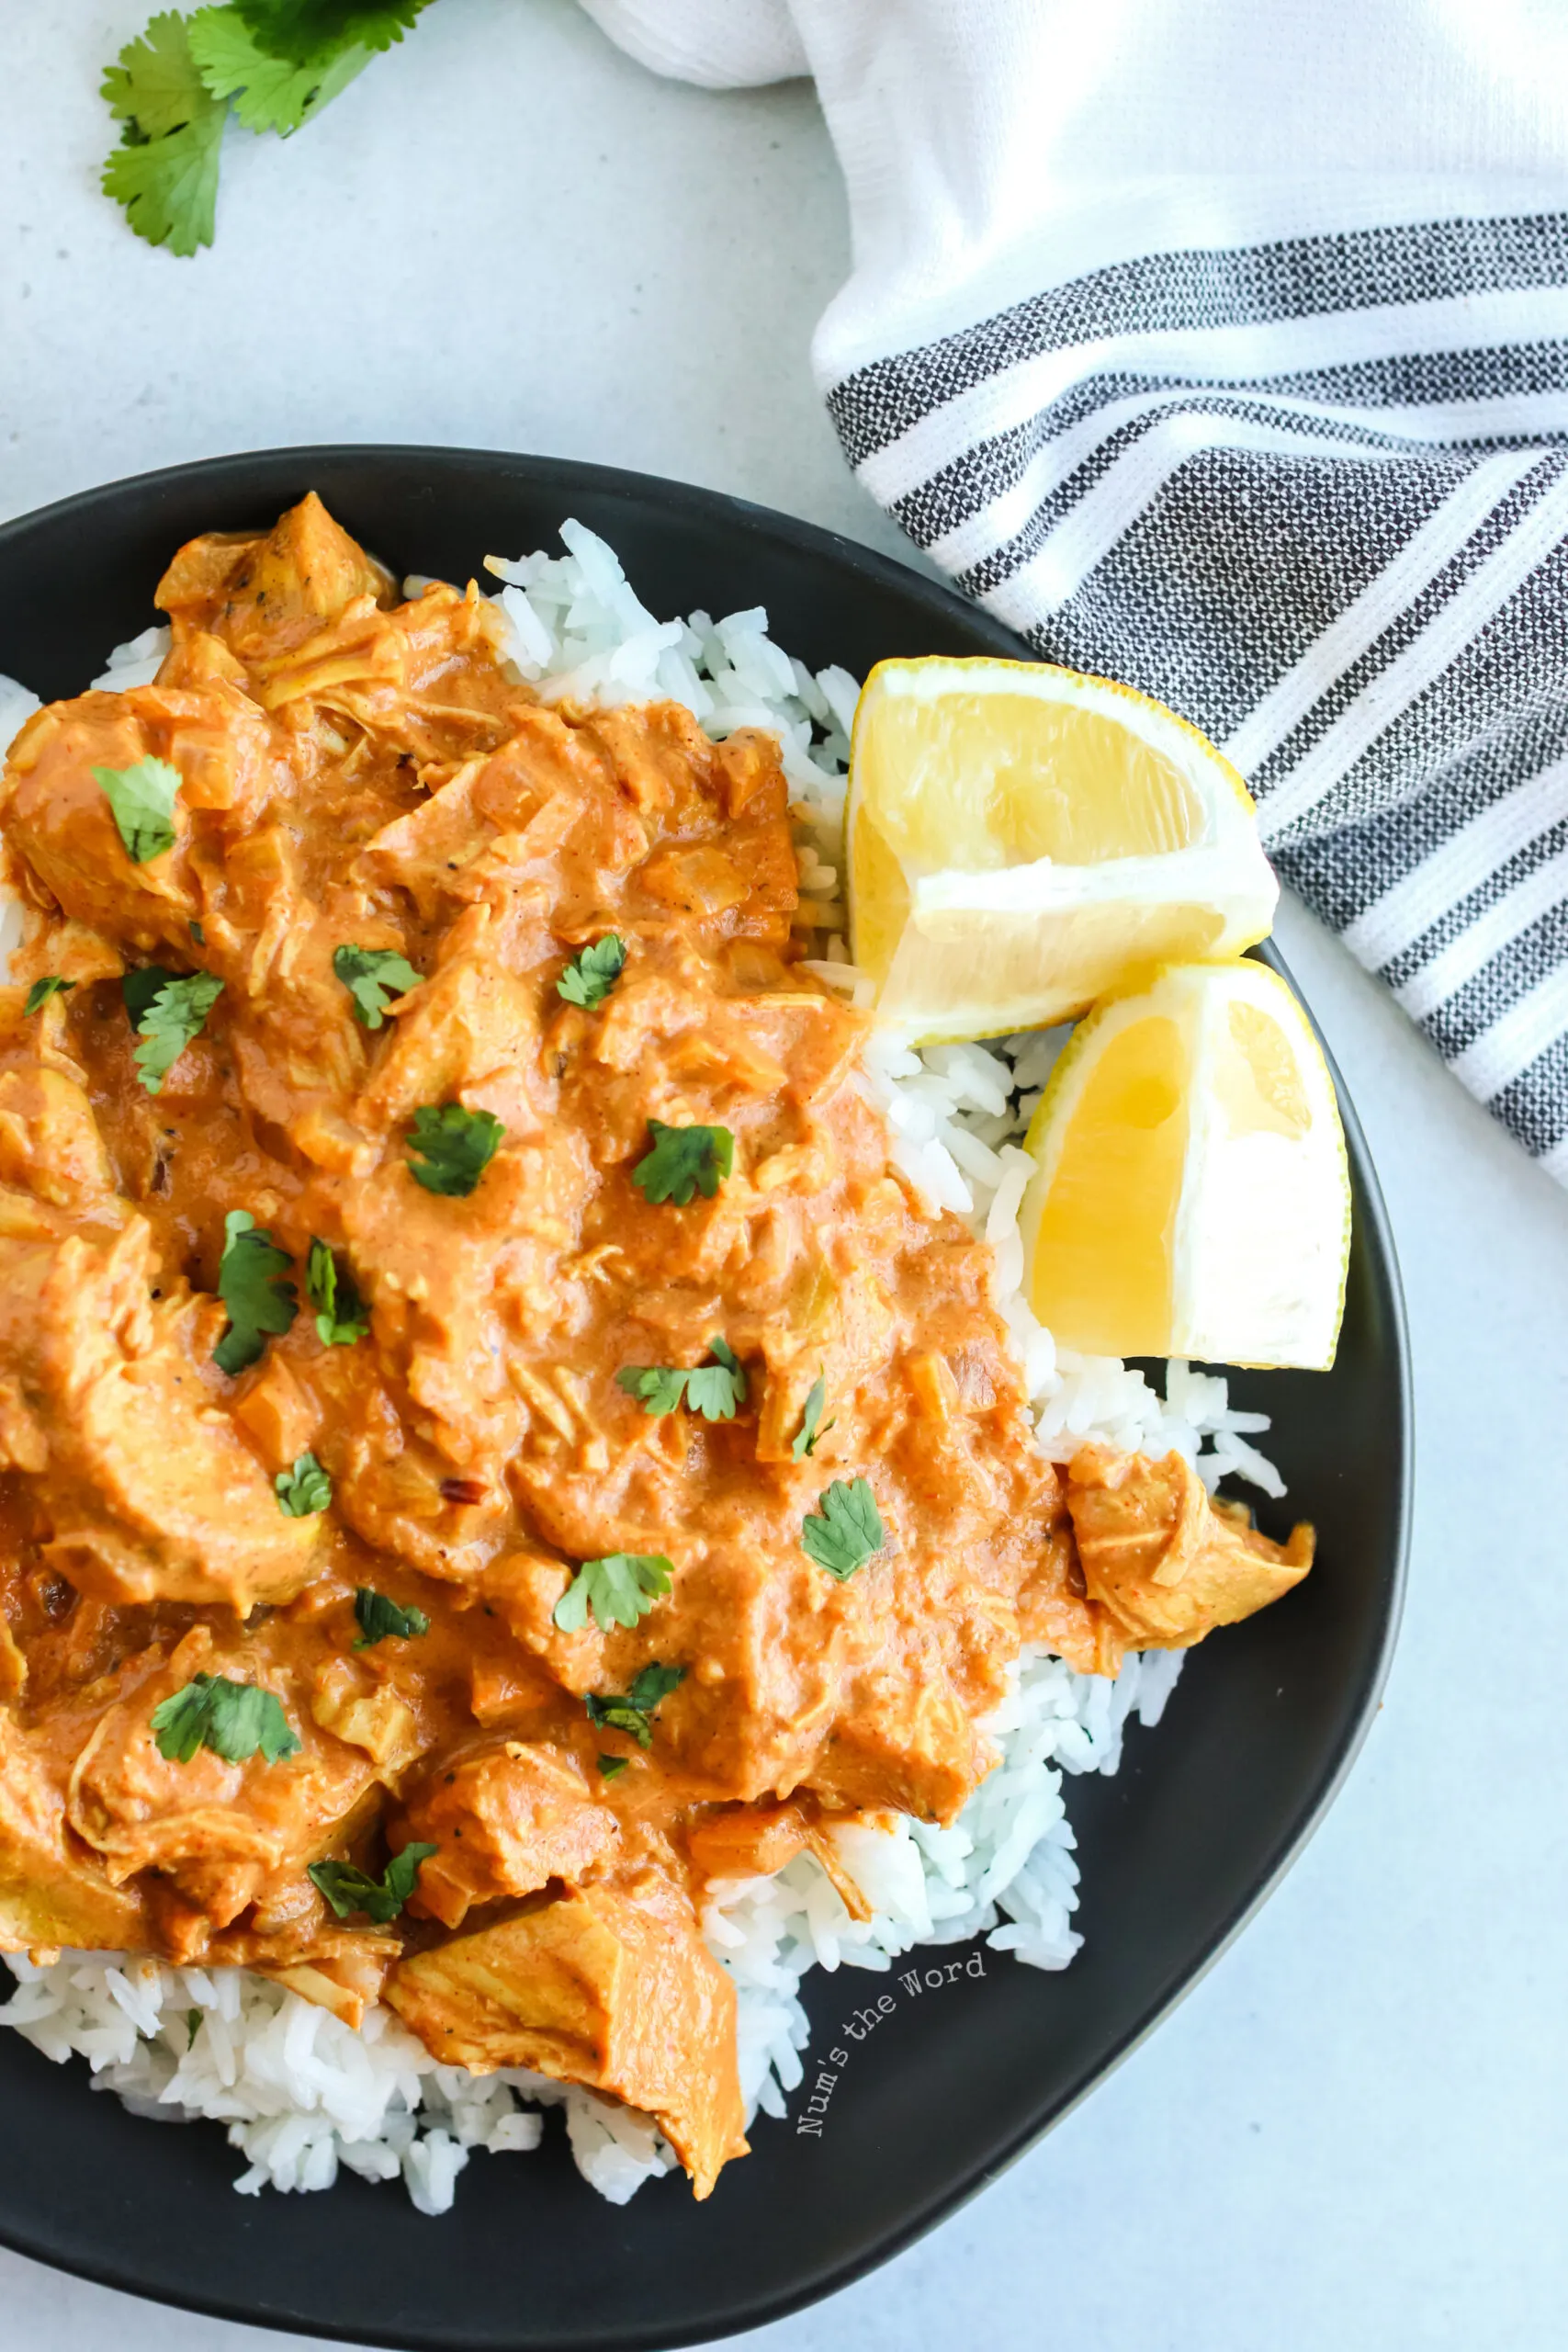 zoomed in image of tikka masala on plate with lemon wedges